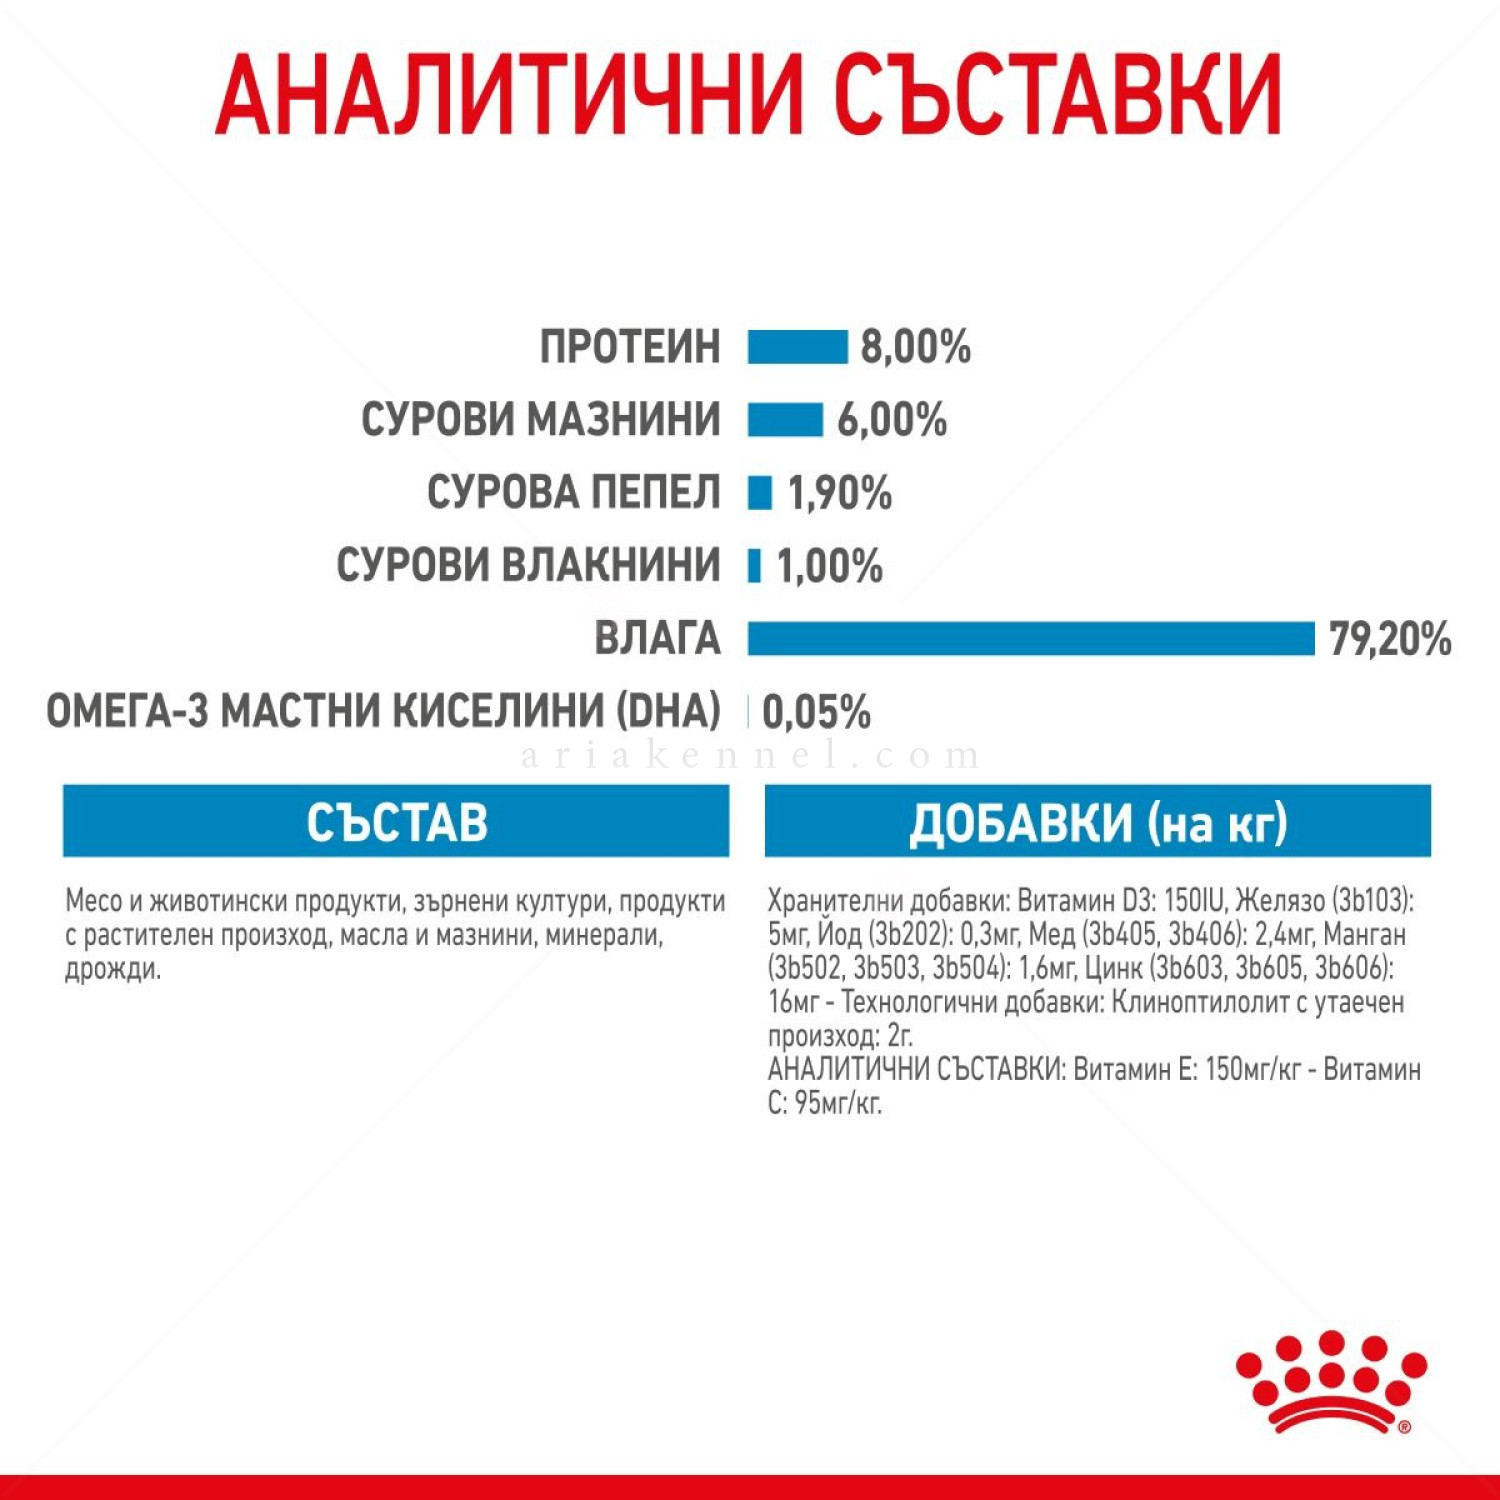 ROYAL CANIN 85 гр X-Small puppy пауч